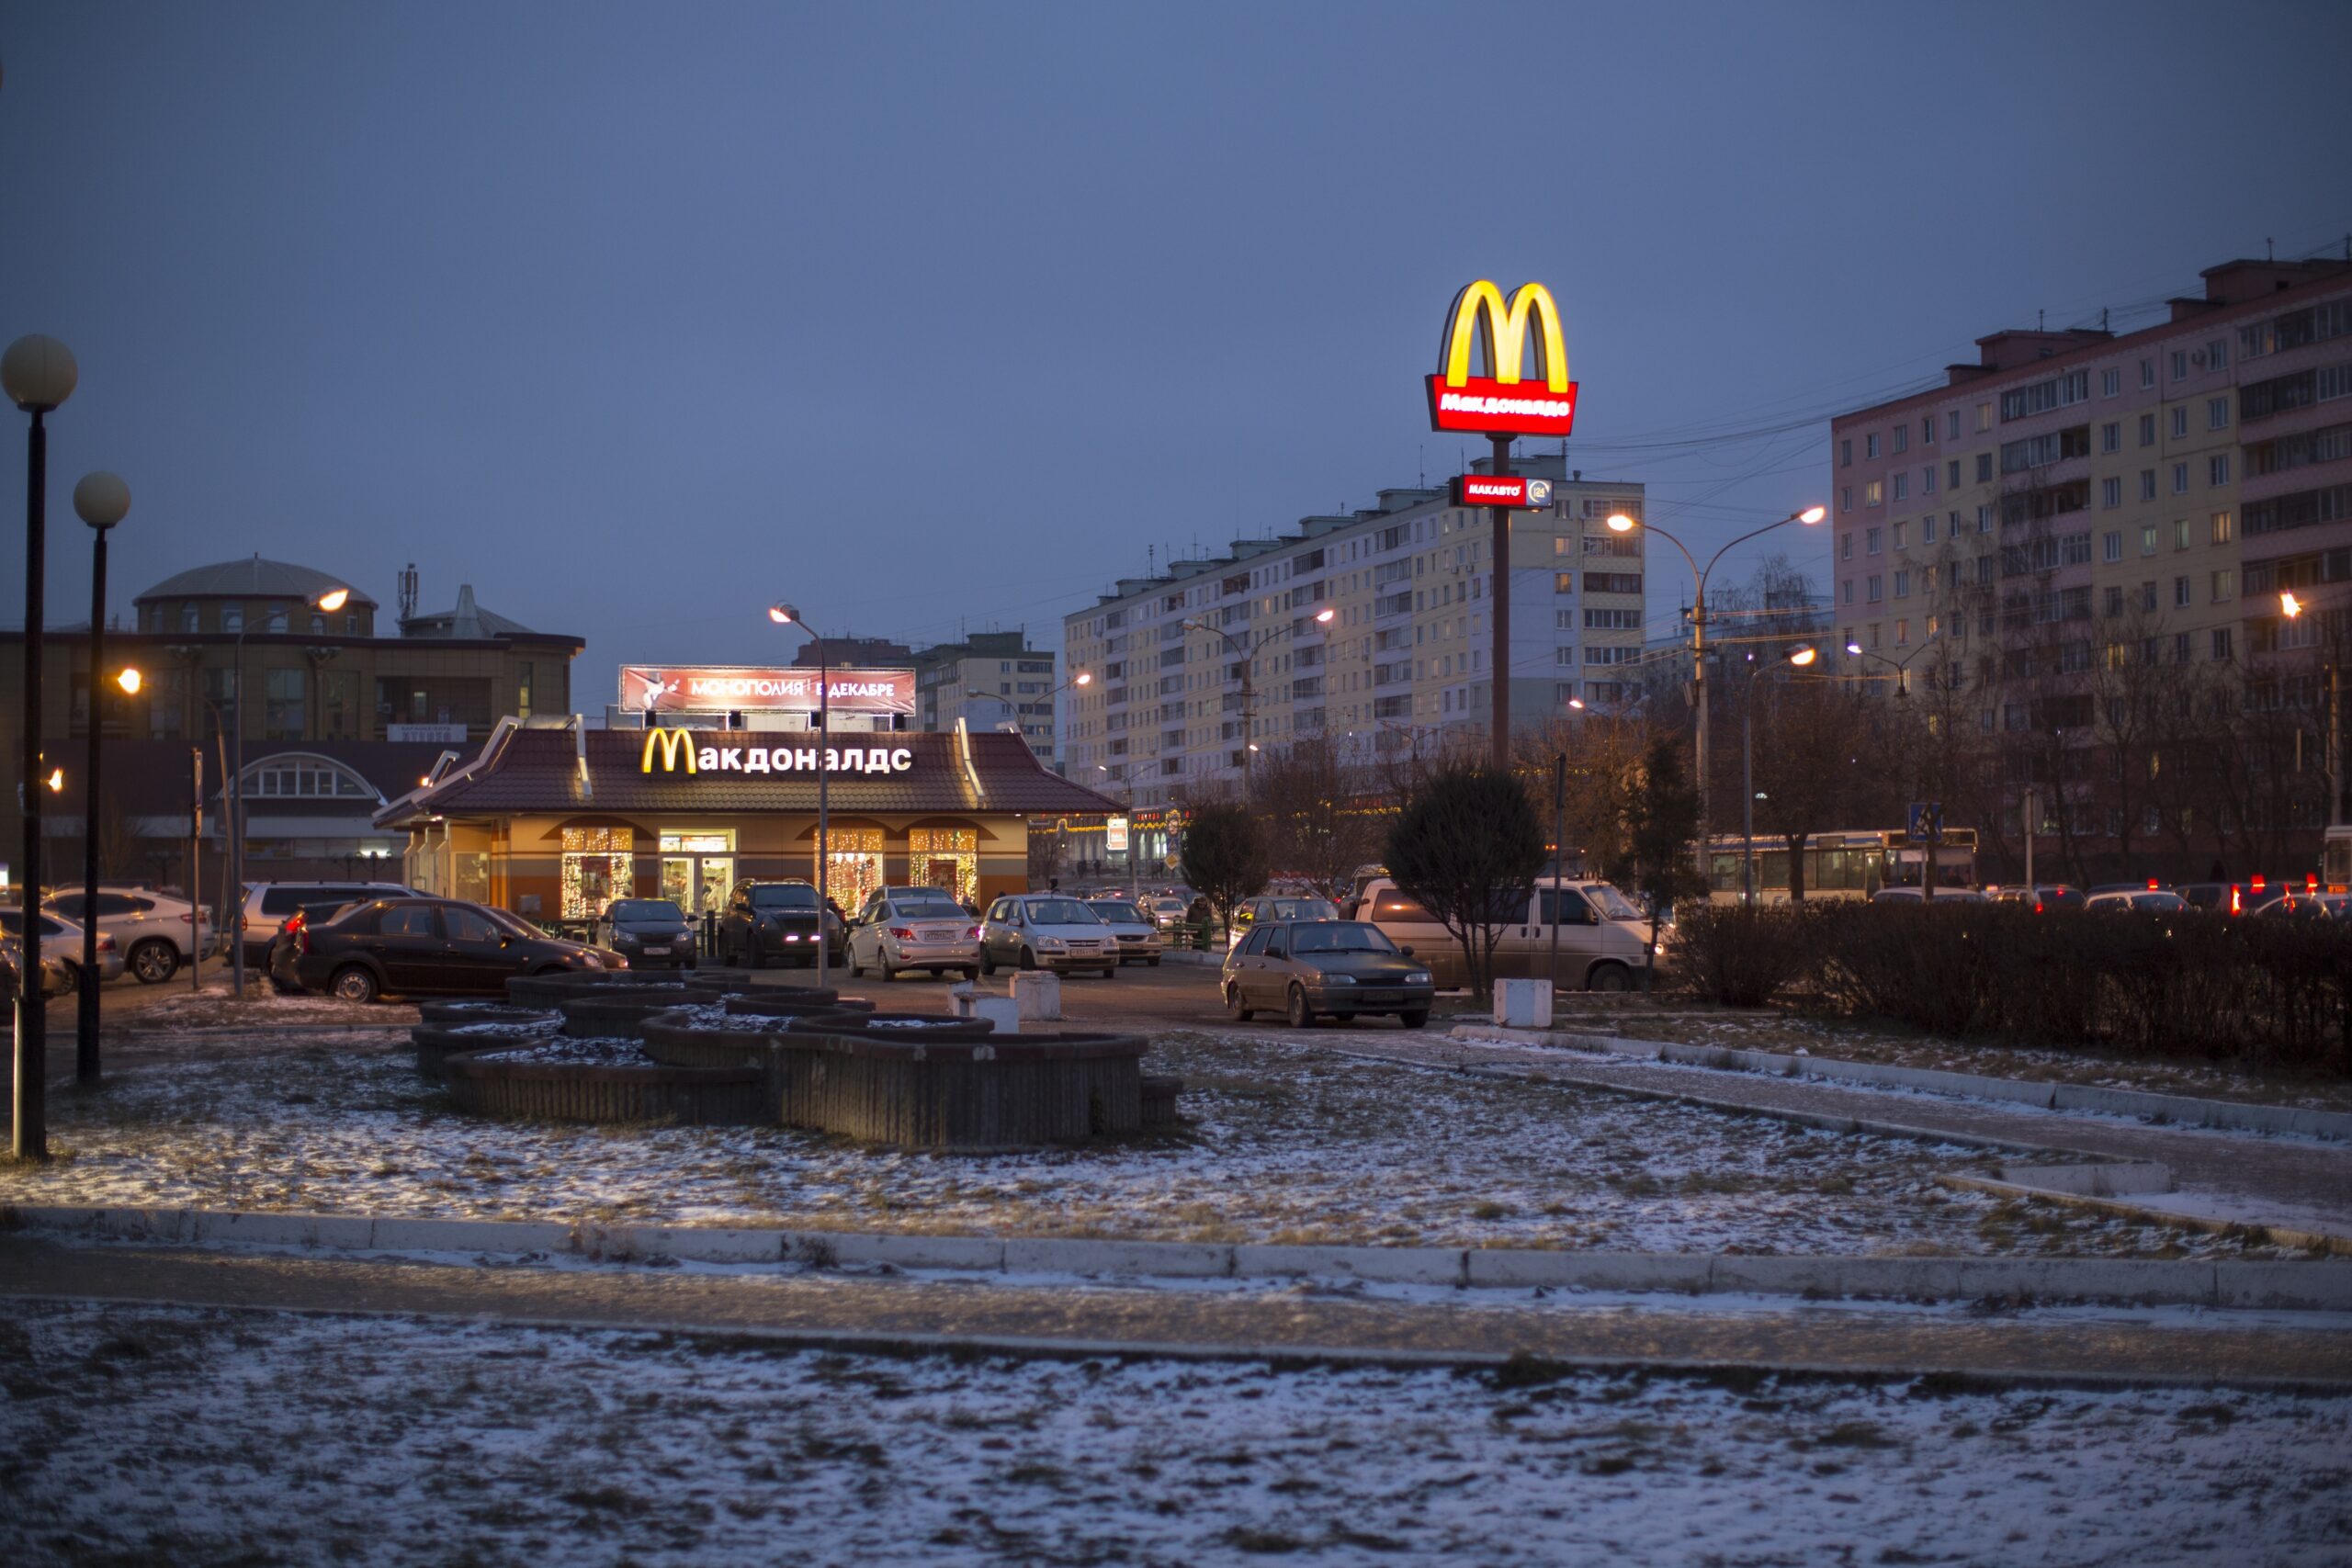 McDonald’s to Sell Its Russian Business, Try to Keep Workers